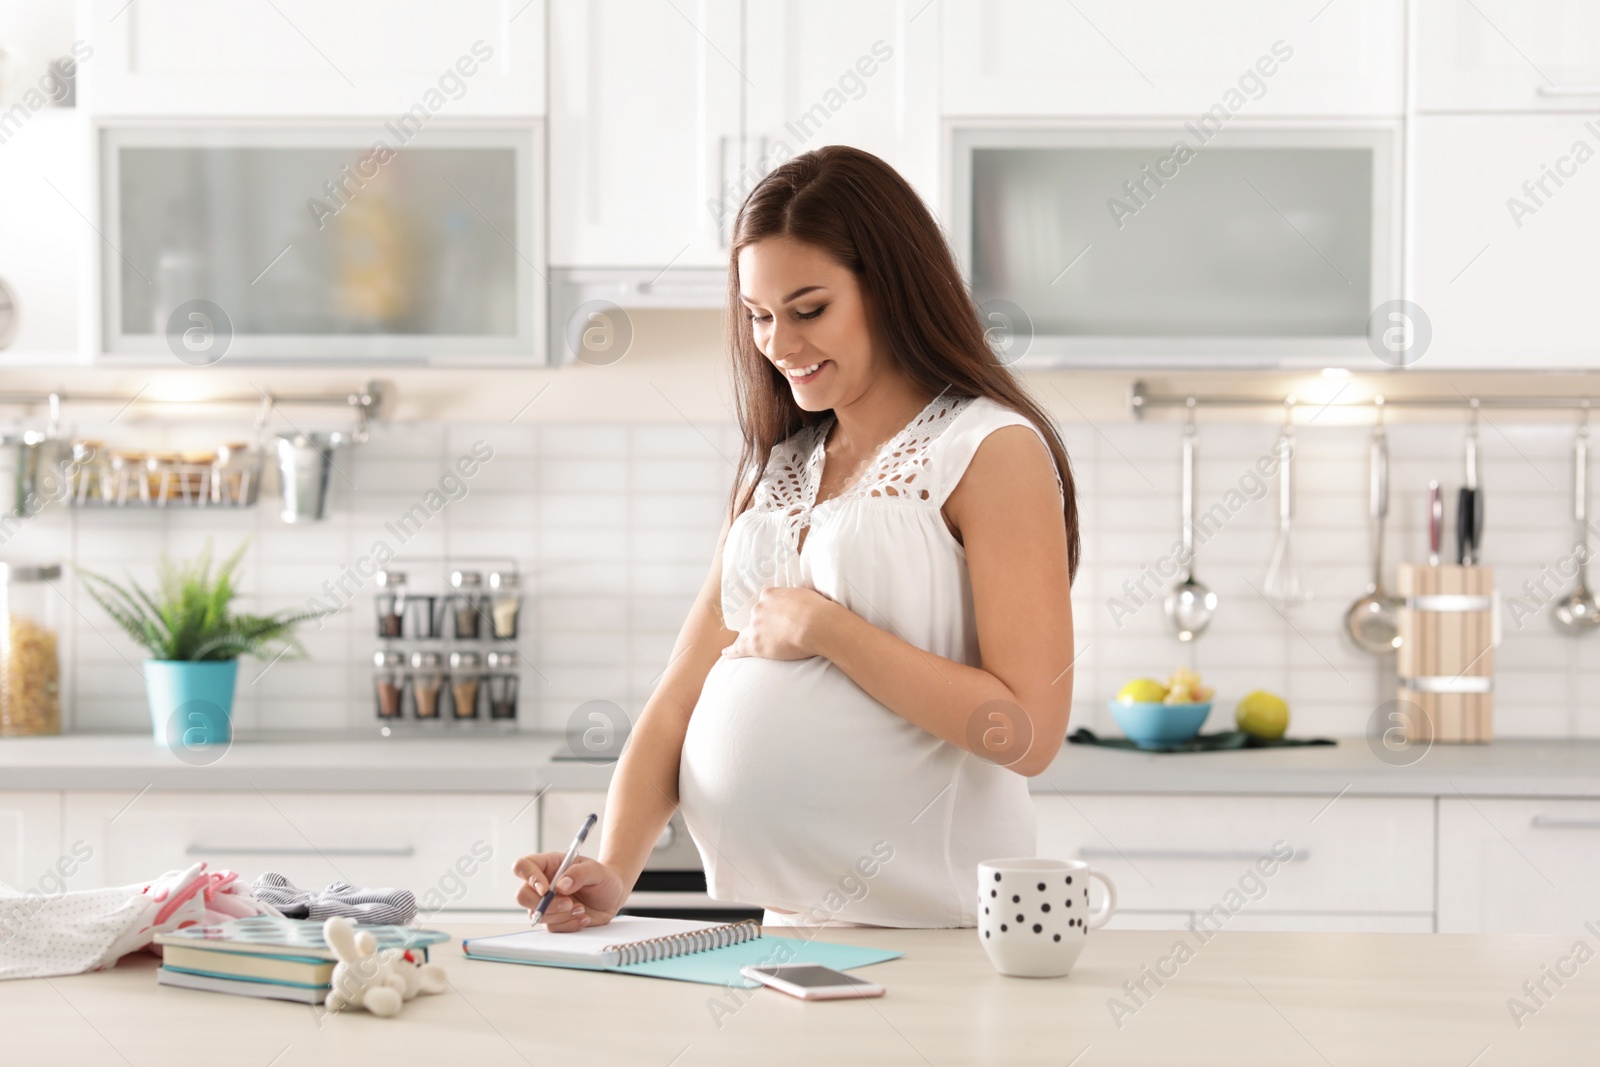 Photo of Pregnant woman writing packing list for maternity hospital in kitchen